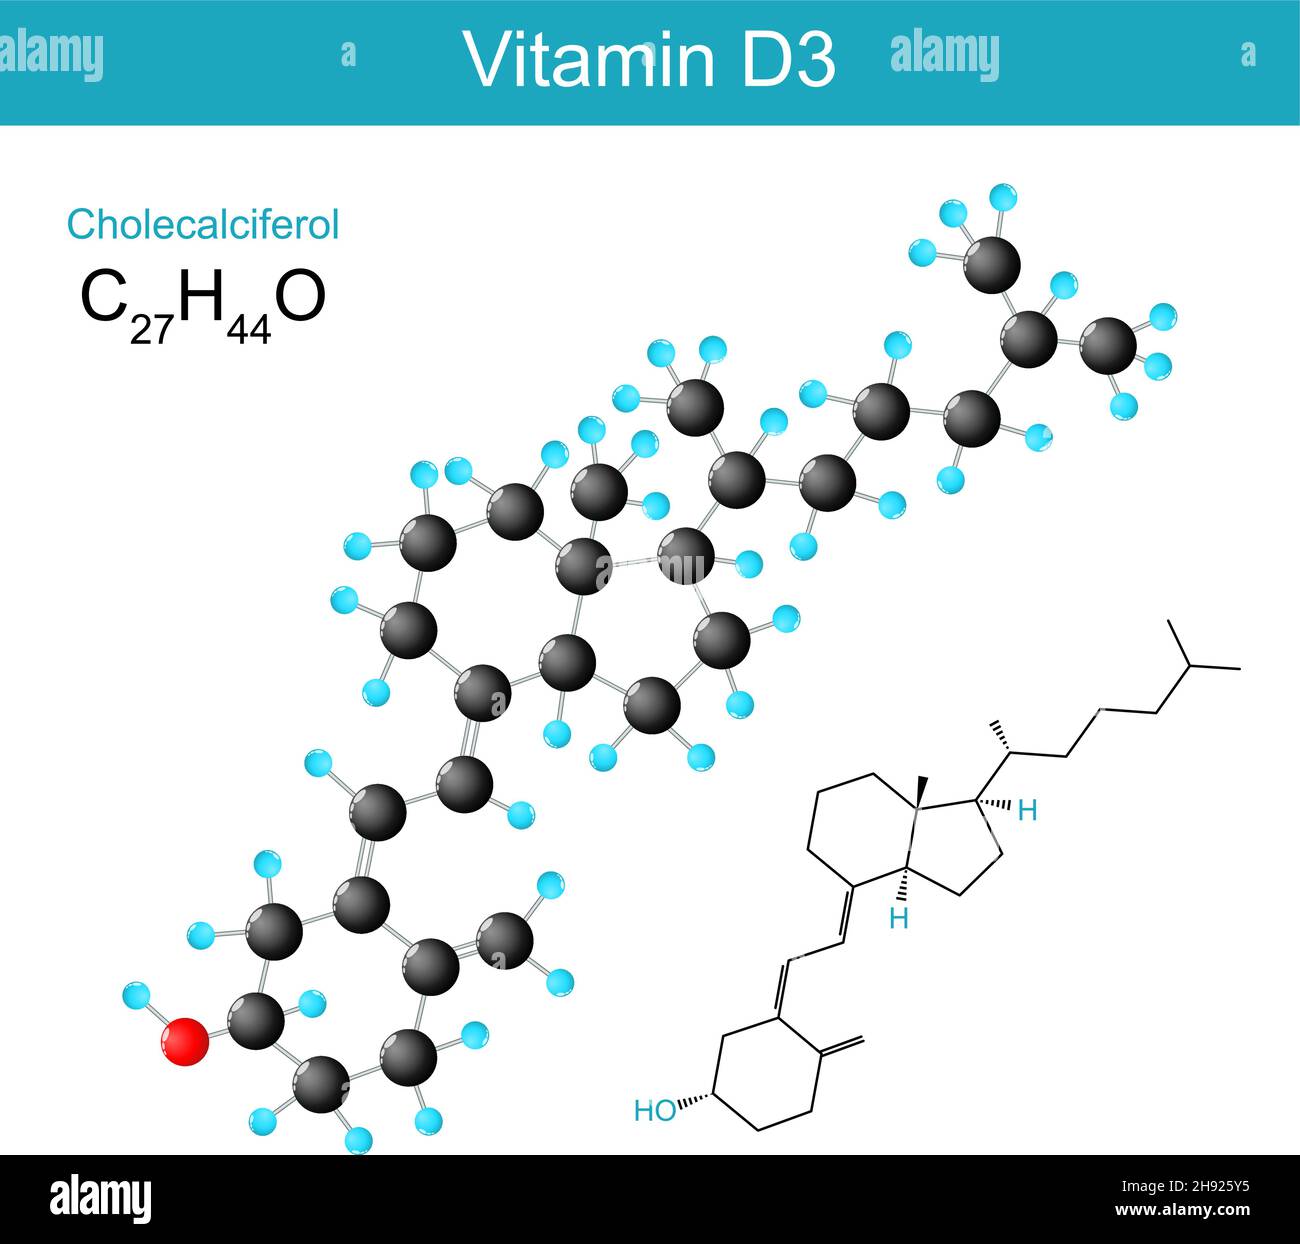 vitamin D3. Cholecalciferol molecular chemical structural formula and model of a type of vitamin D. Vector illustration Stock Vector